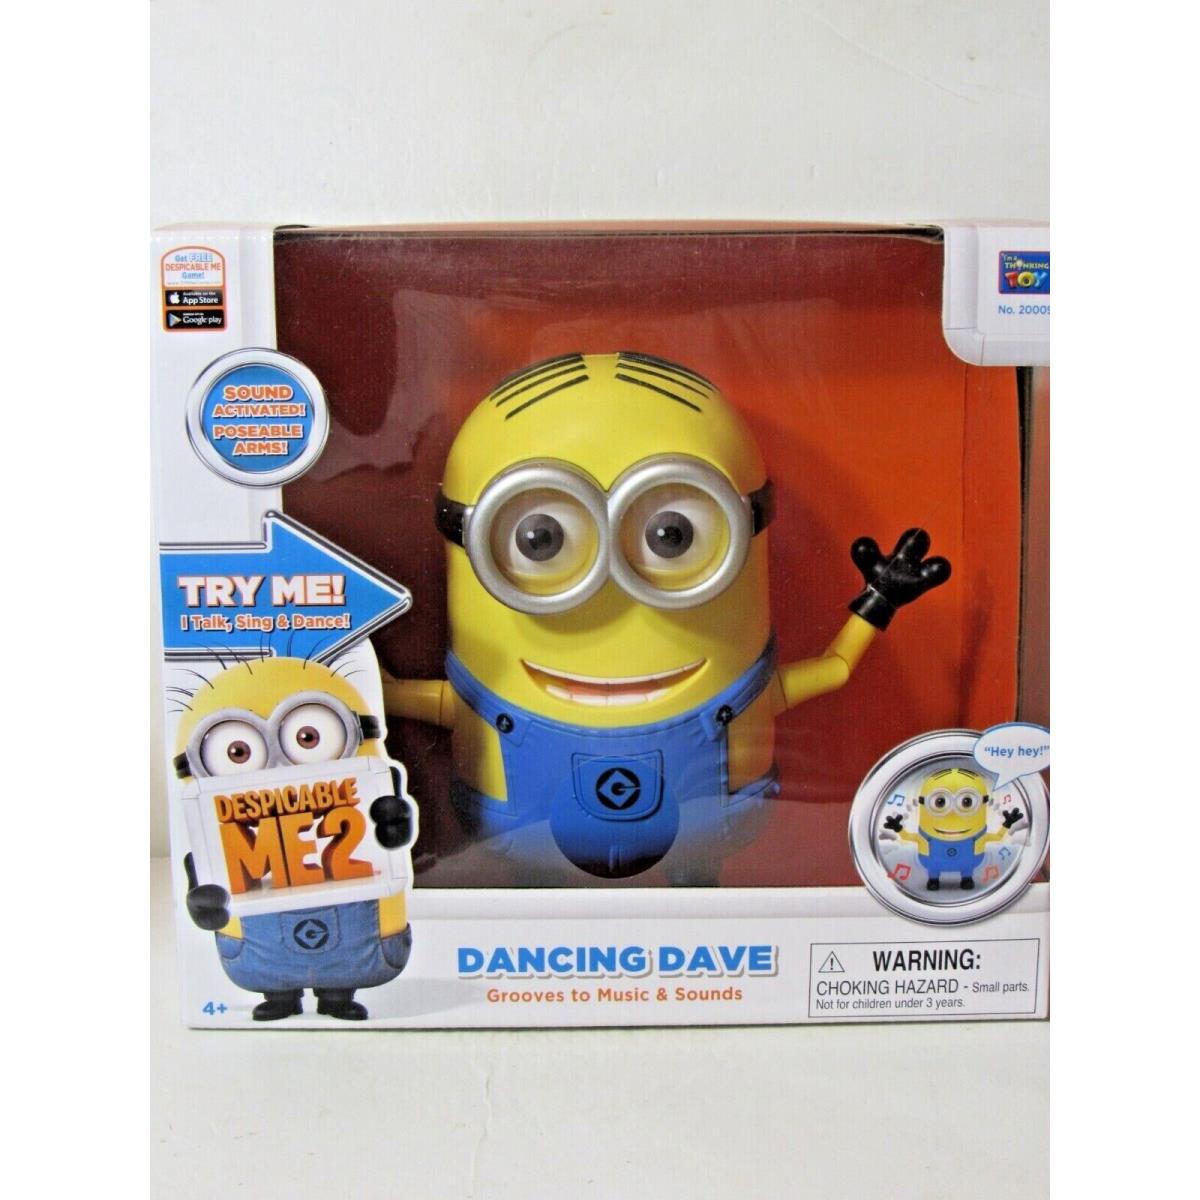 Transformers Despicable Me Dancing Dave Laughing Action Figure Thinkway Toy Works 2013